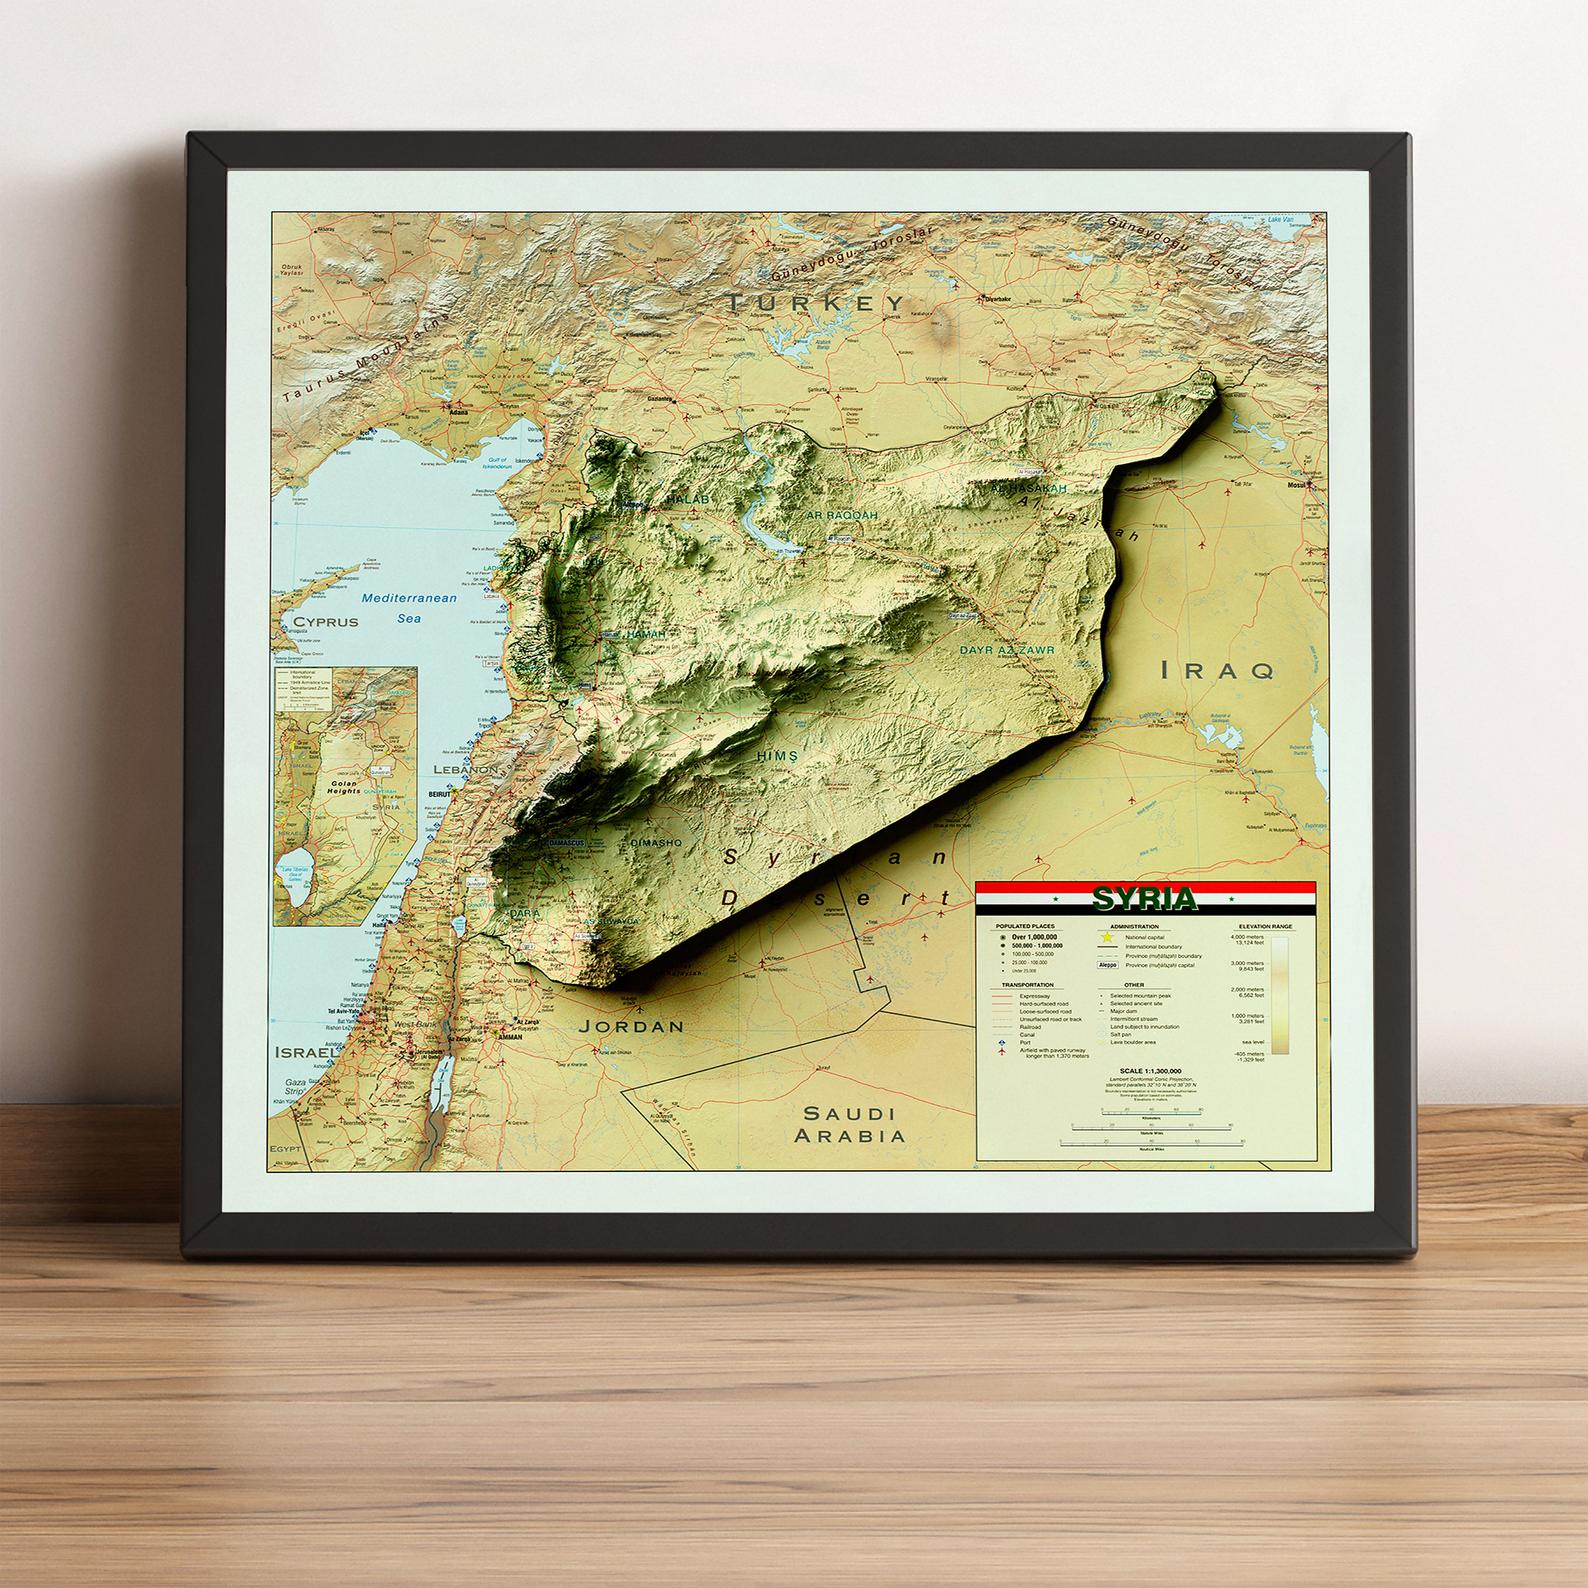 Image showing a vintage relief map of Syria